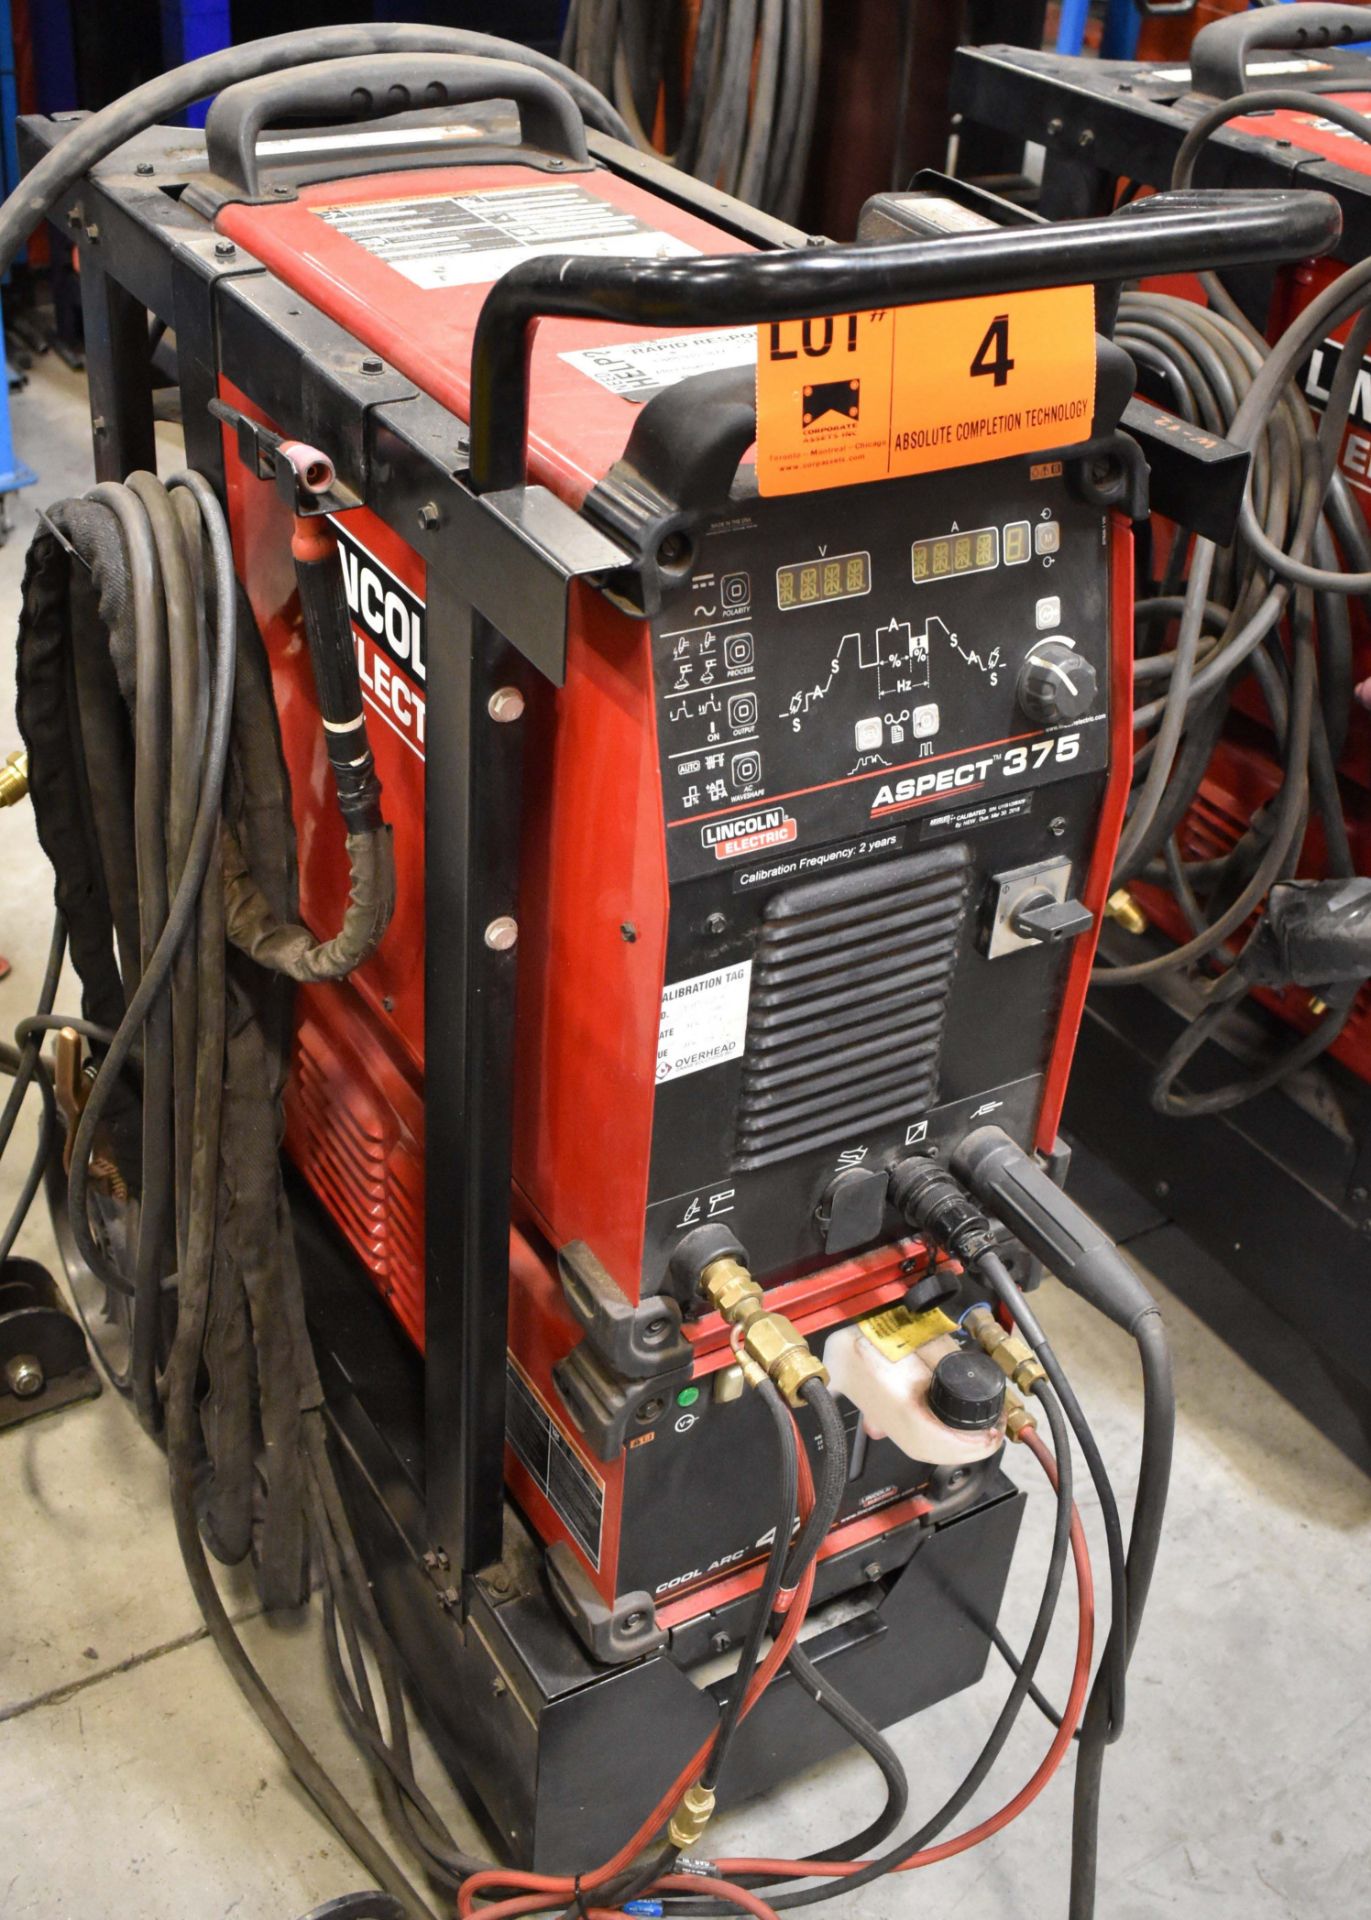 LINCOLN (2015) ELECTRIC ASPECT 375 DIGITAL TIG WELDER WITH LINCOLN ELECTRIC COOL ARC 47 WATER - Bild 2 aus 2